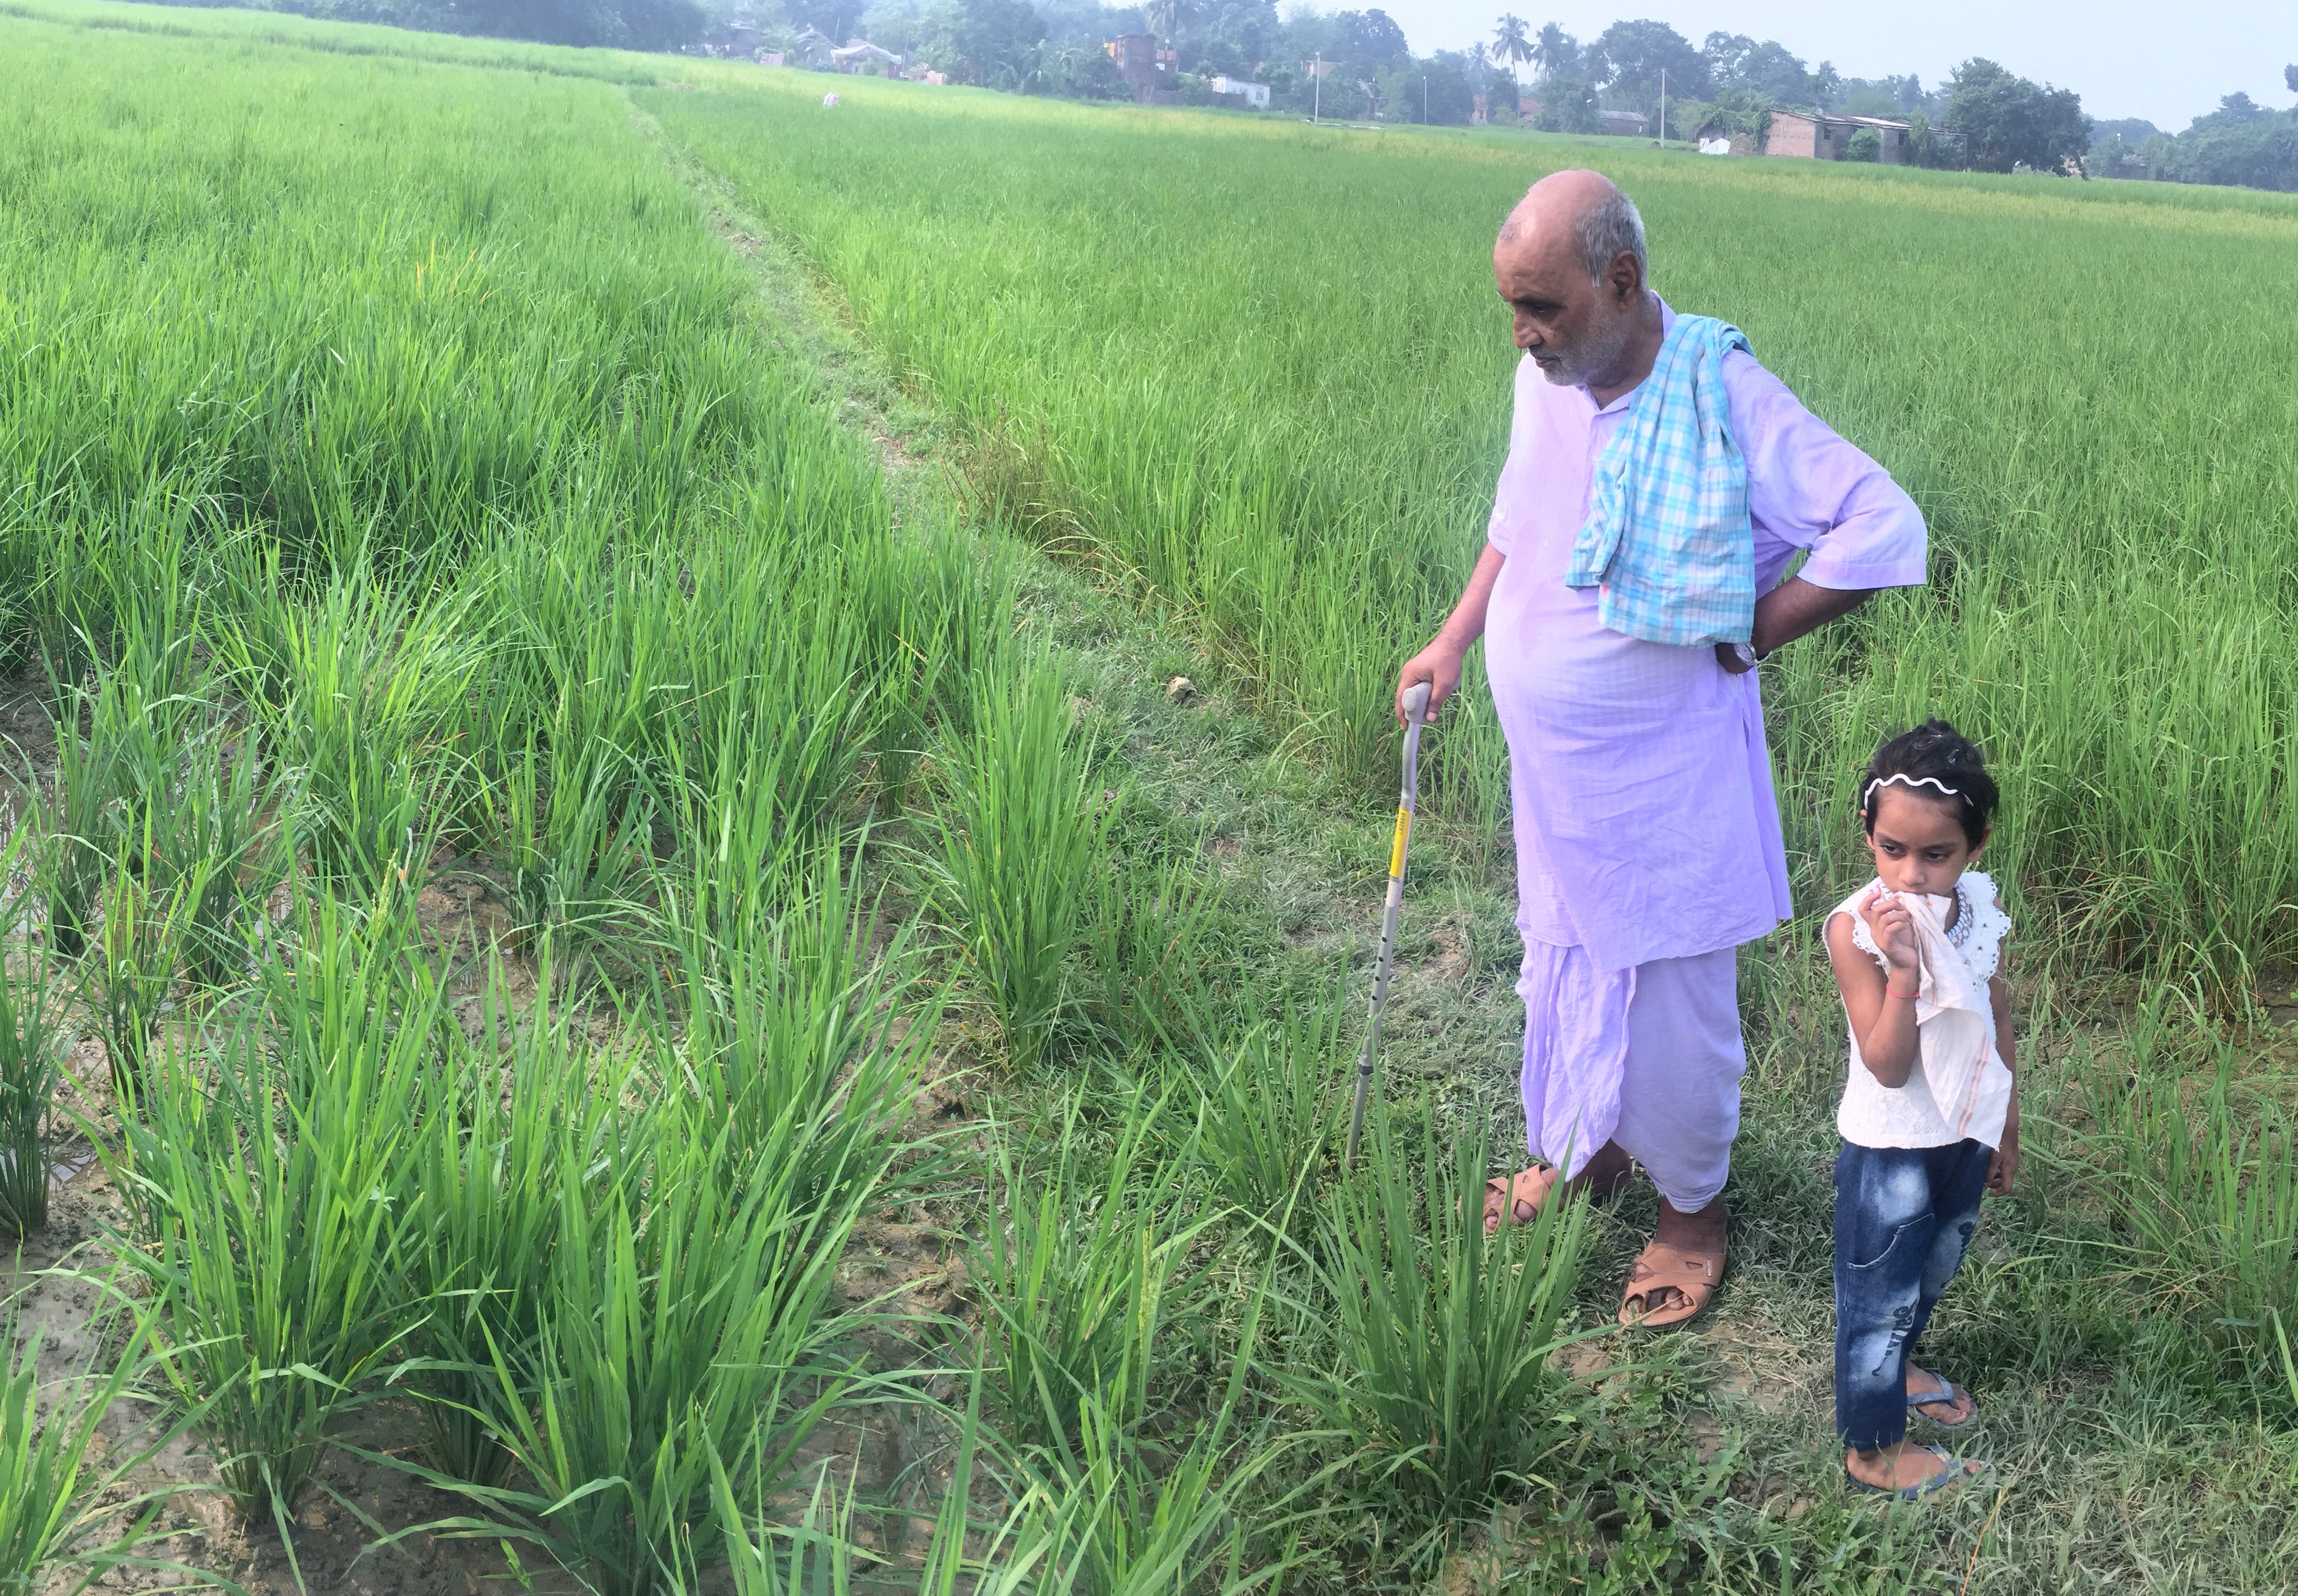 As the floodwater receded, Mr. Jha's Swarna-Sub1 rice plants started growing again while other varieties showed no signs of recovery. (Photo: STRASA)